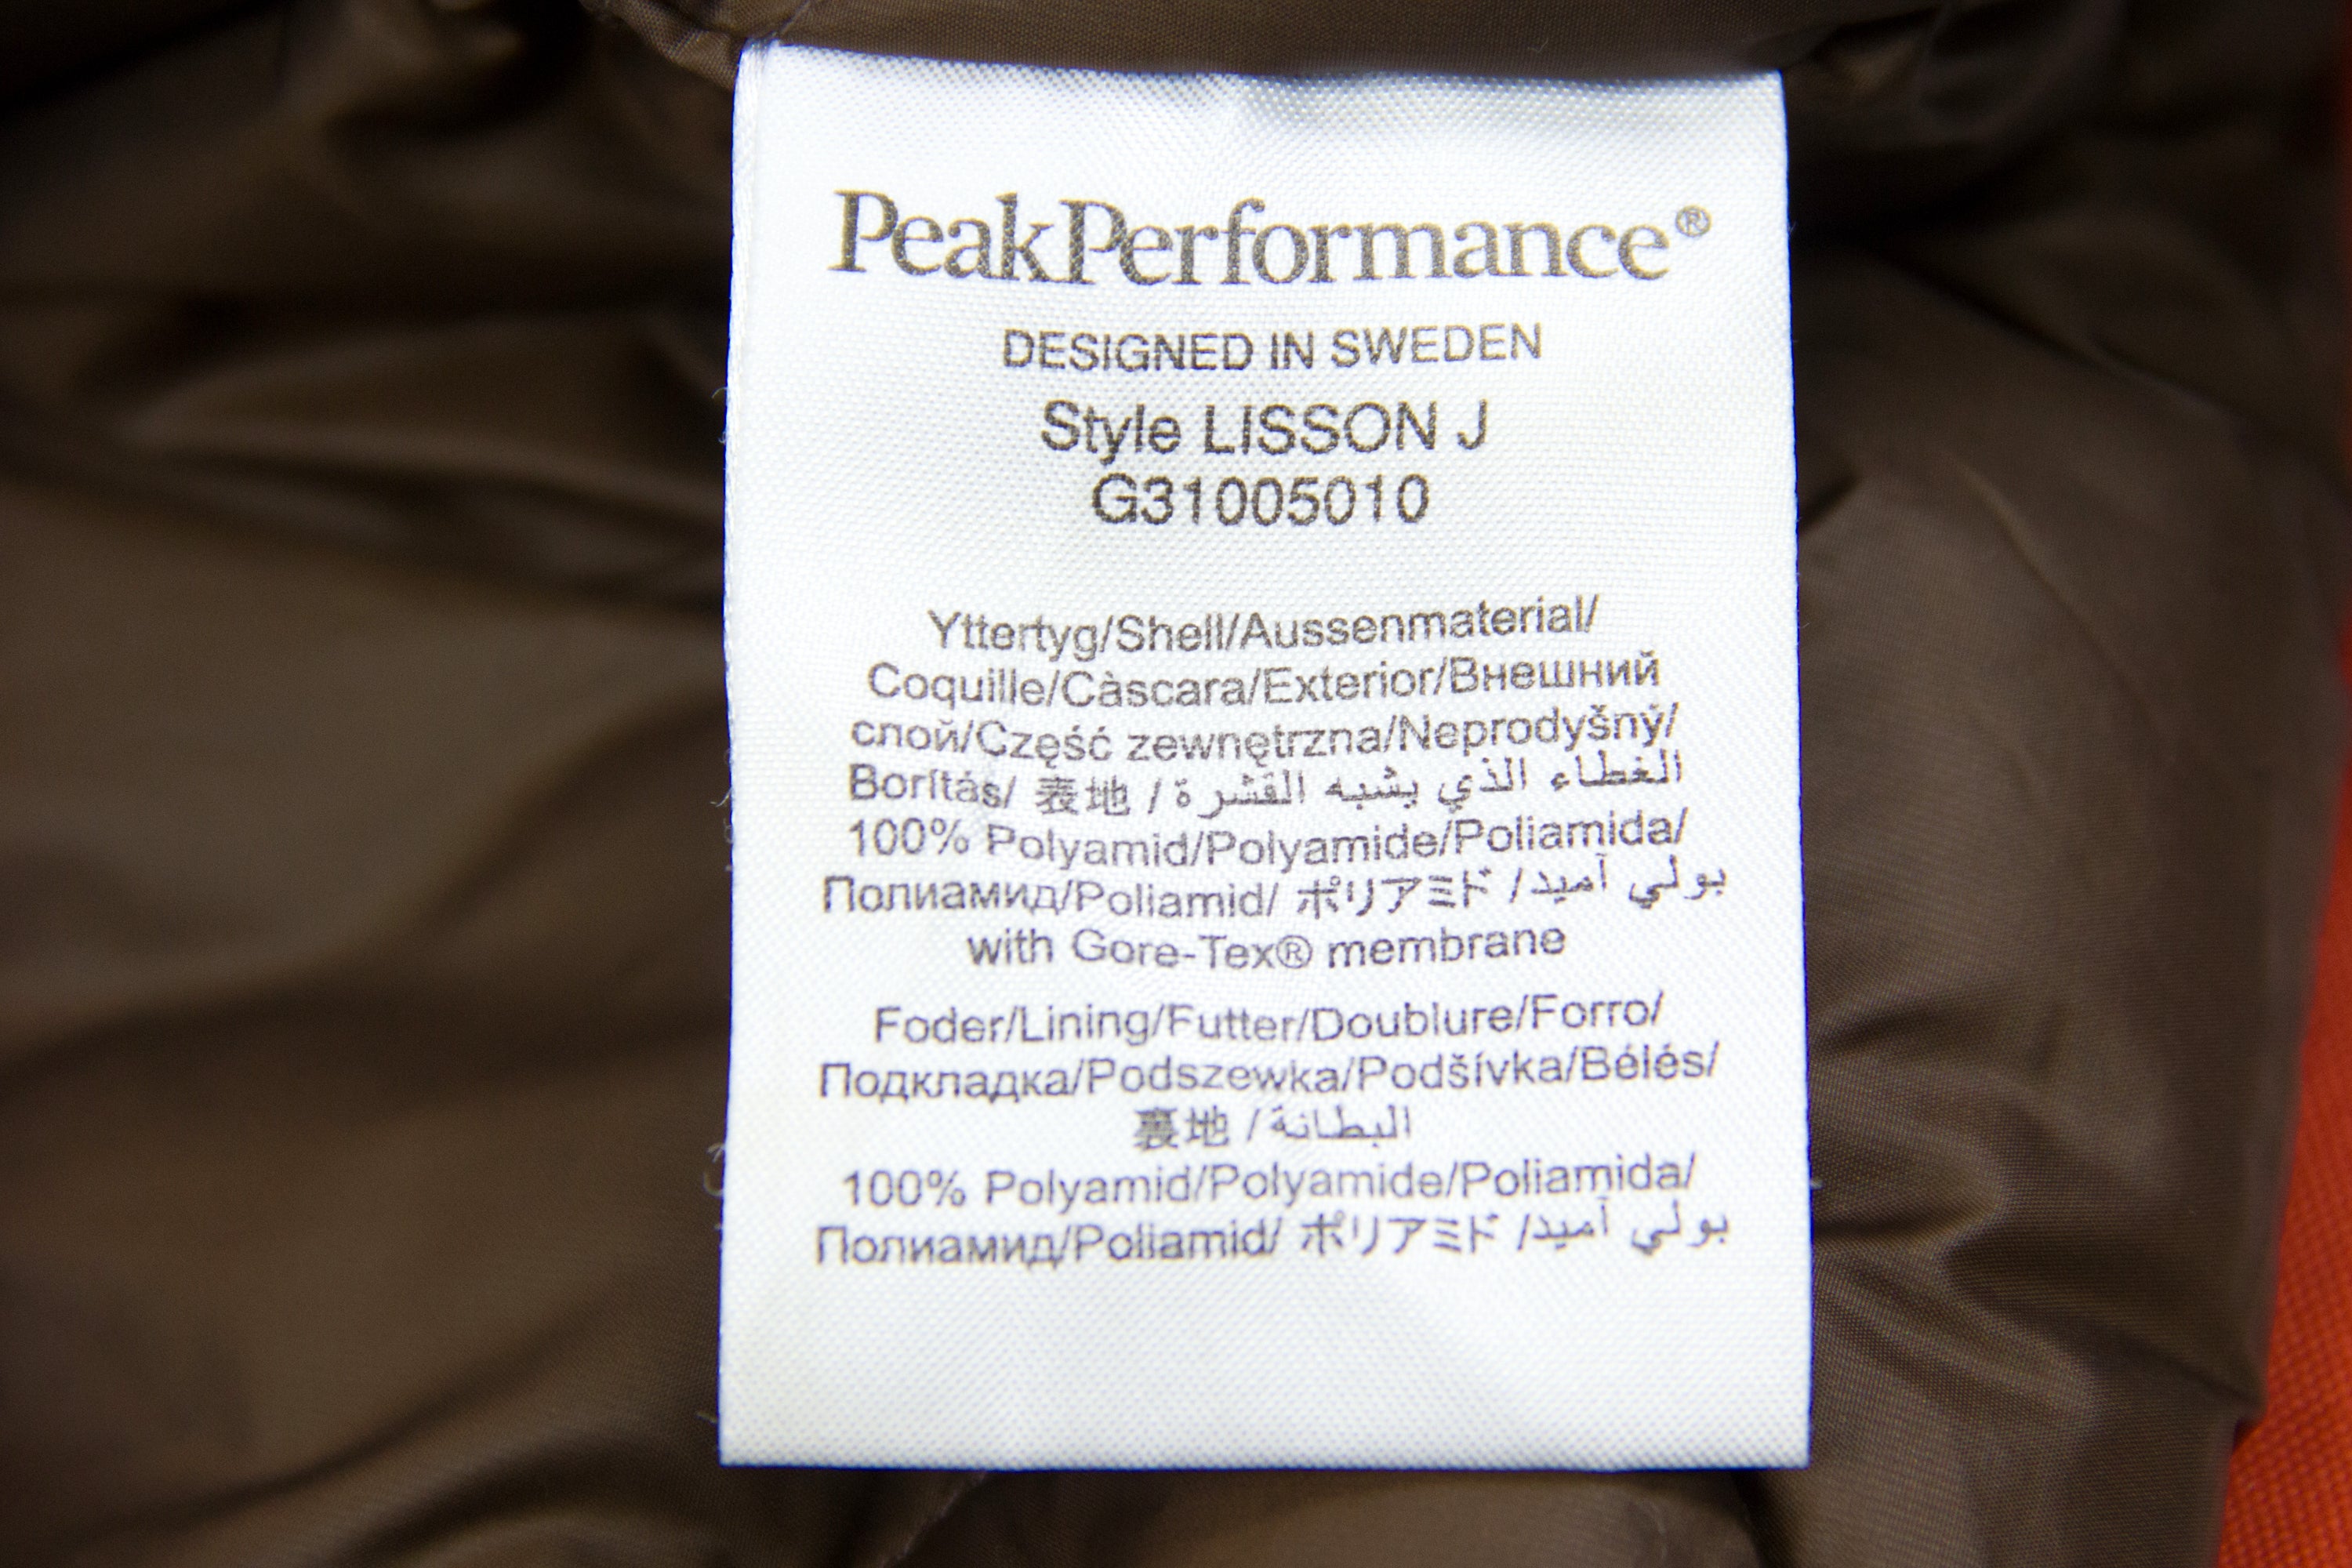 PEAK PERFORMANCE Lisson J Gore-Tex Fur Hooded Down Parka SIZE S - secondfirst